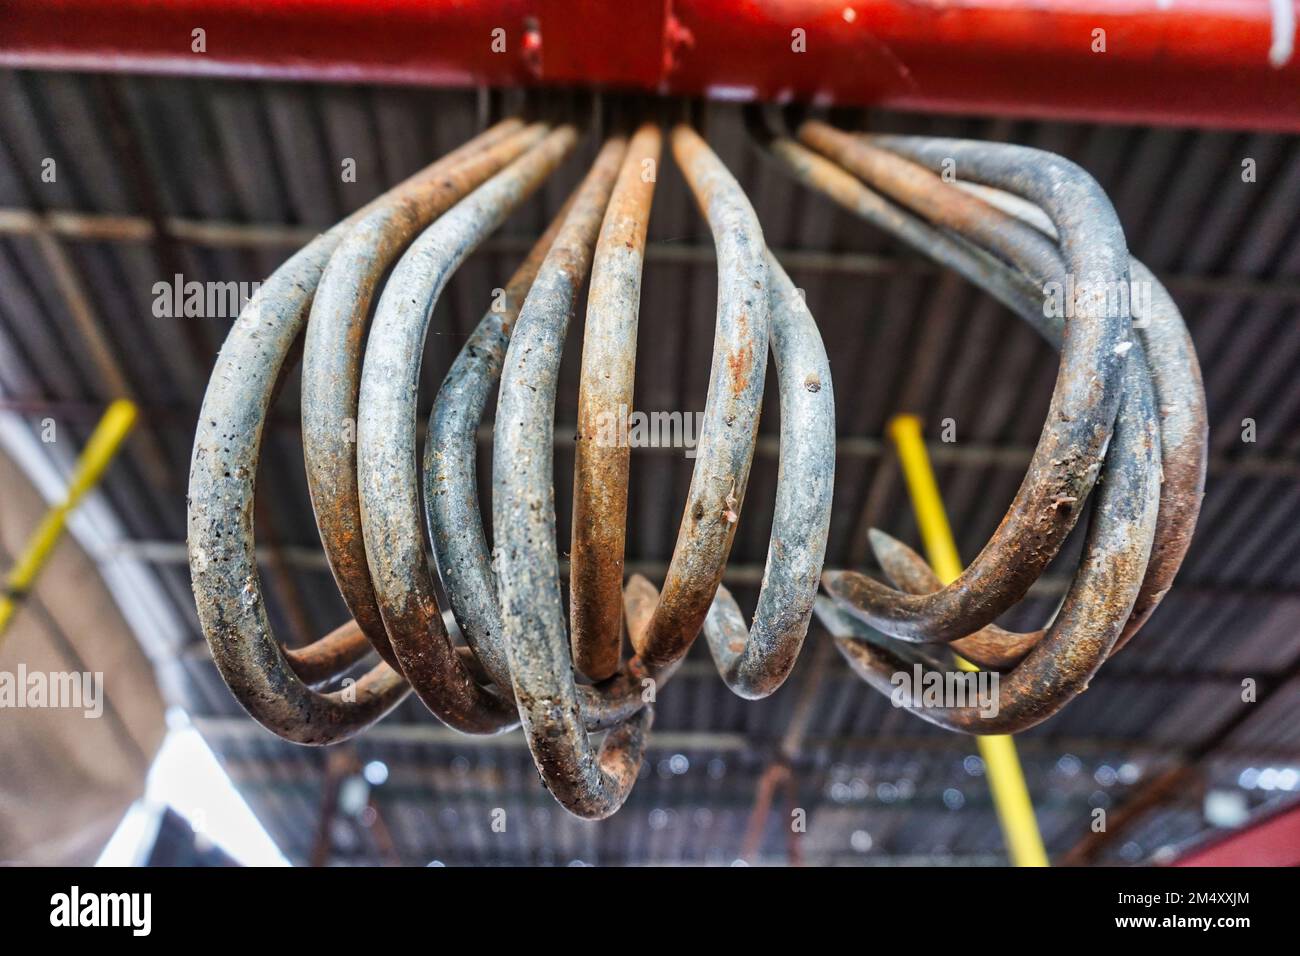 iron hangers for hanging animals in the slaughterhouse Stock Photo